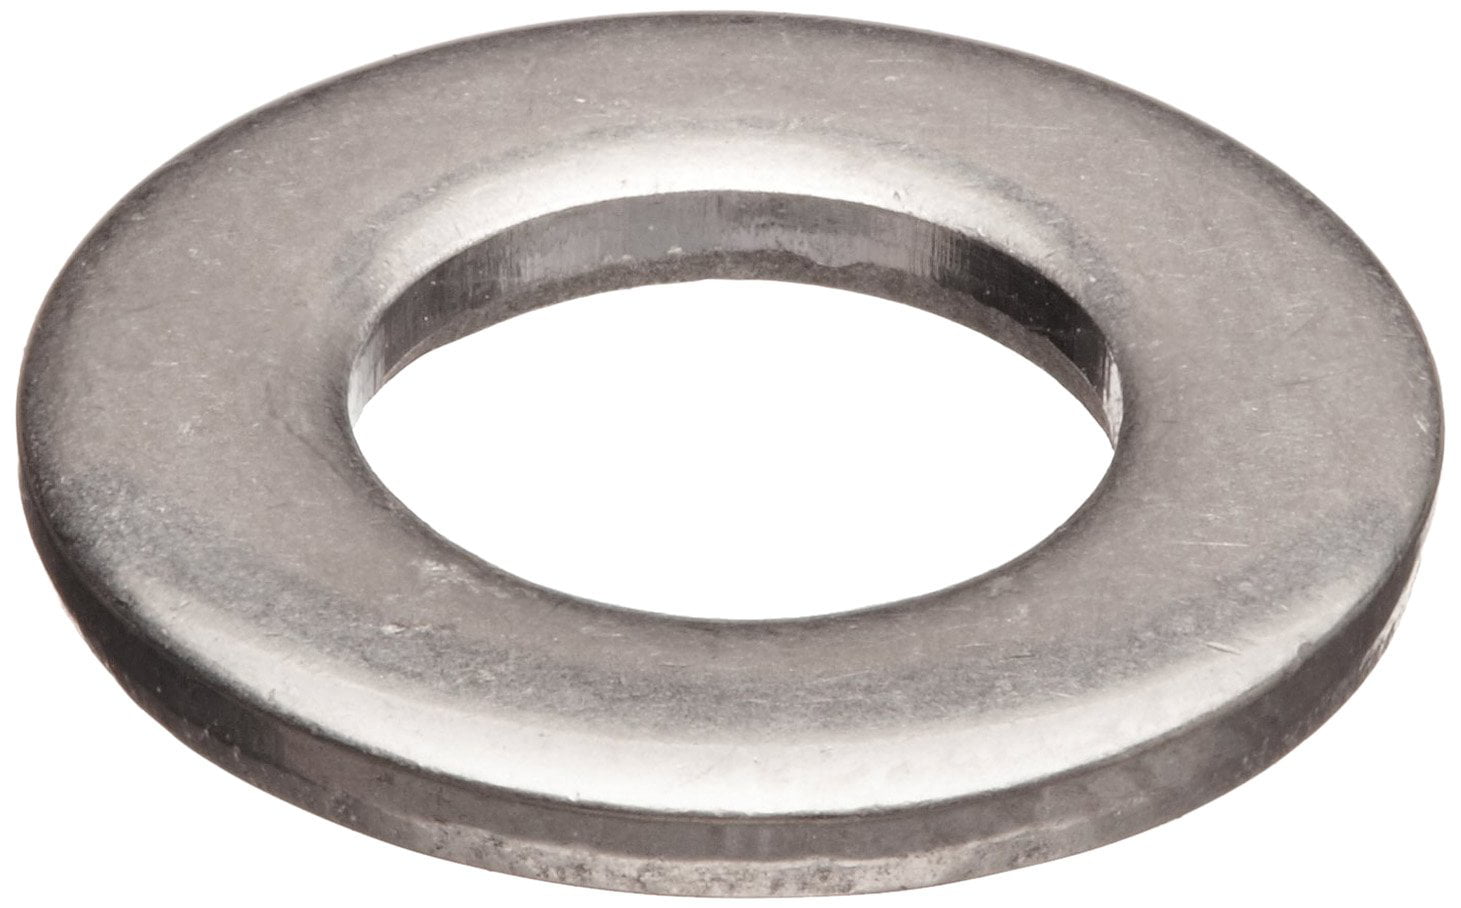 Flat Washers Stainless Steel 18-8 Full Assortment of Sizes Available in Listing 